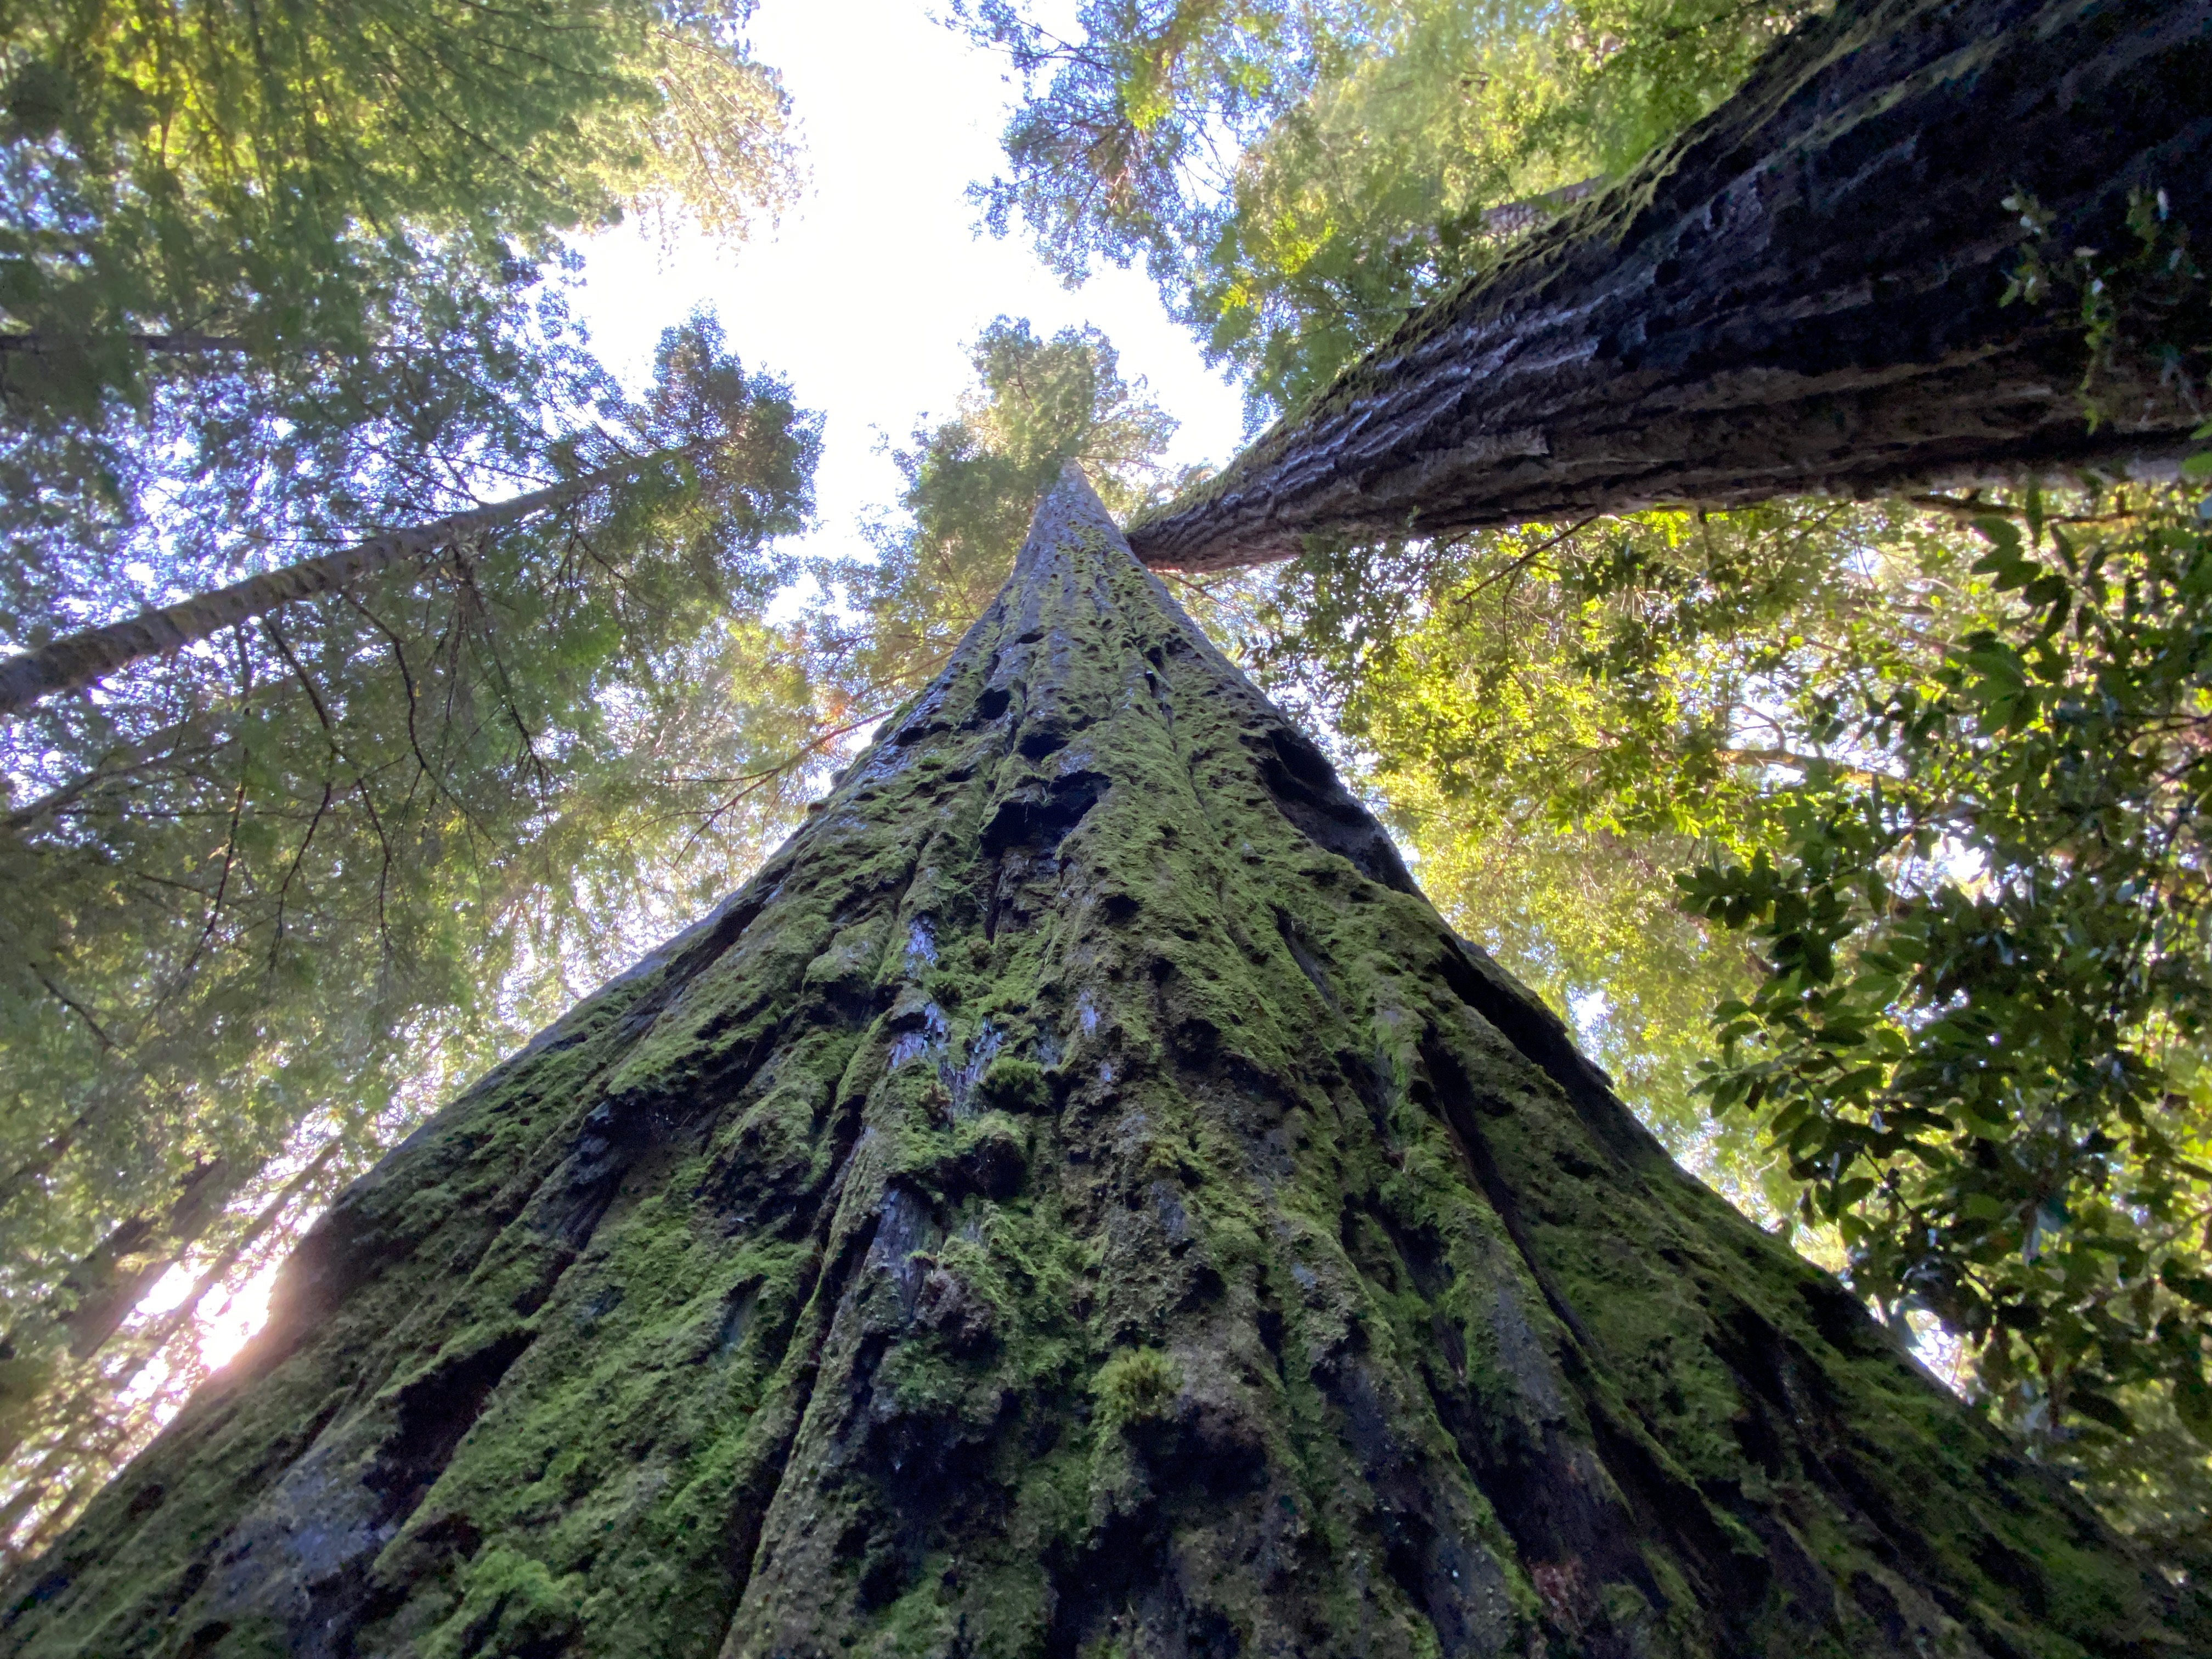 A view looking up a redwood from ground.